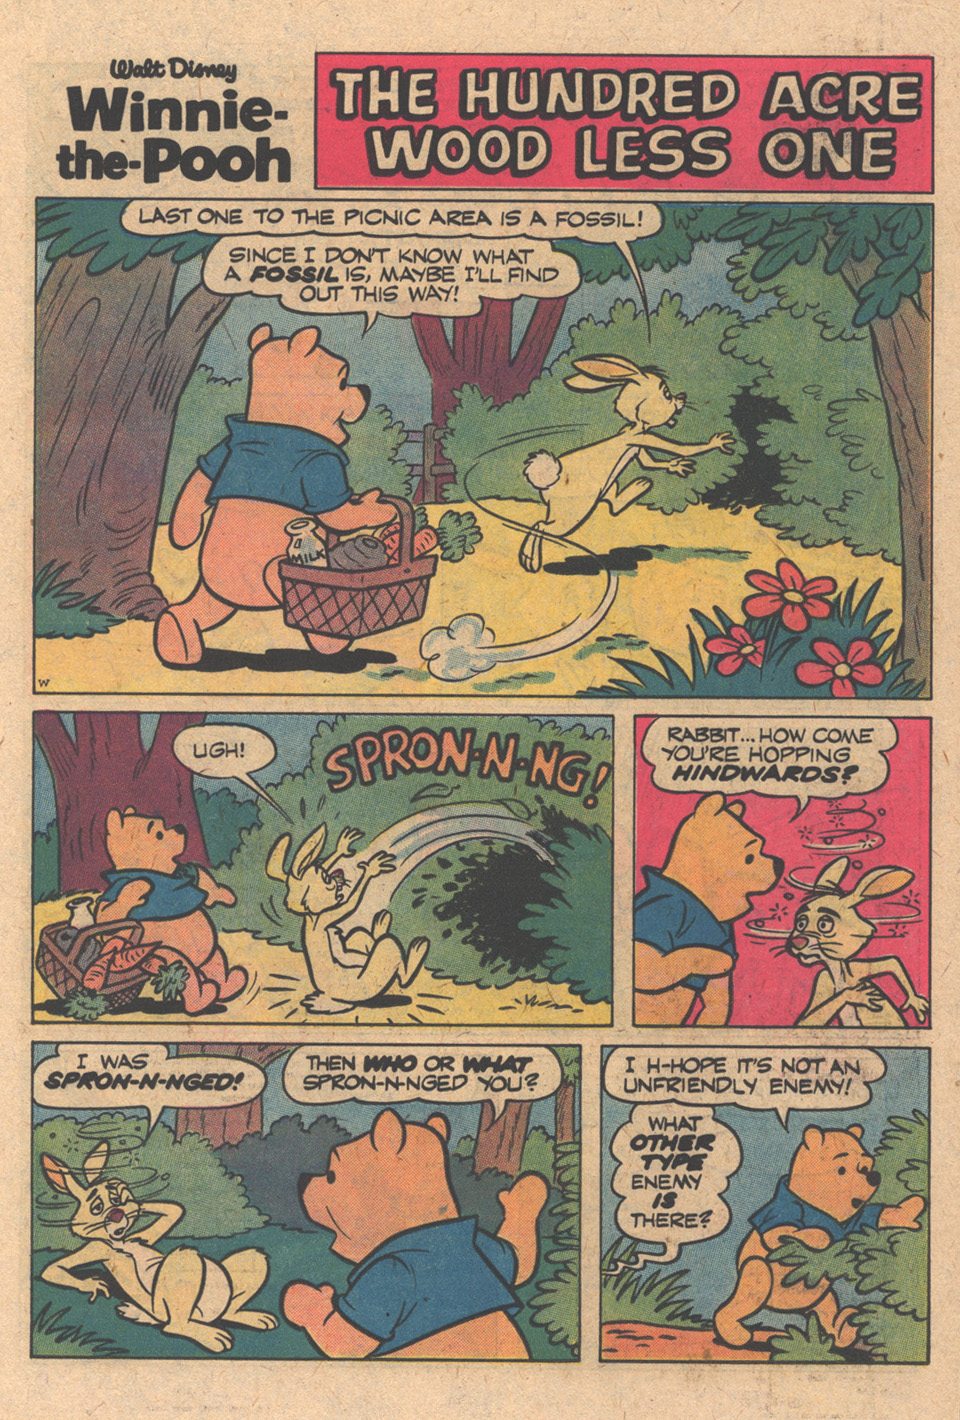 Read online Winnie-the-Pooh comic -  Issue #6 - 15